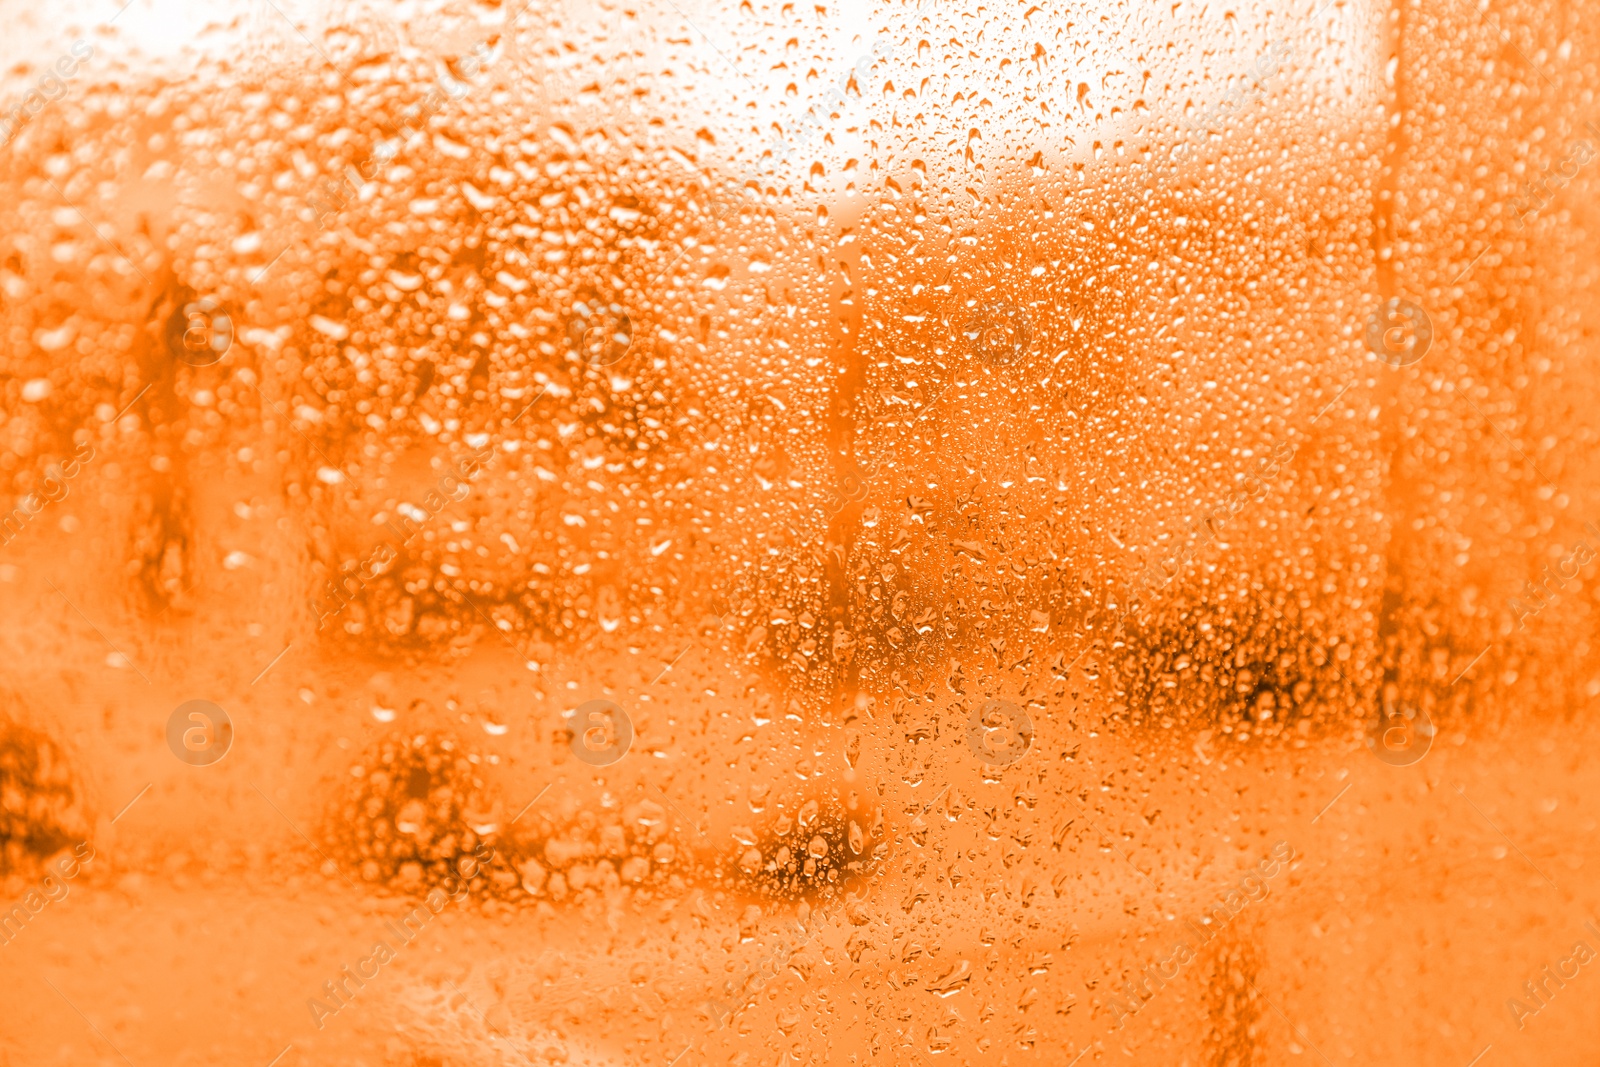 Image of Closeup view of foggy window with rain drops. Toned in orange